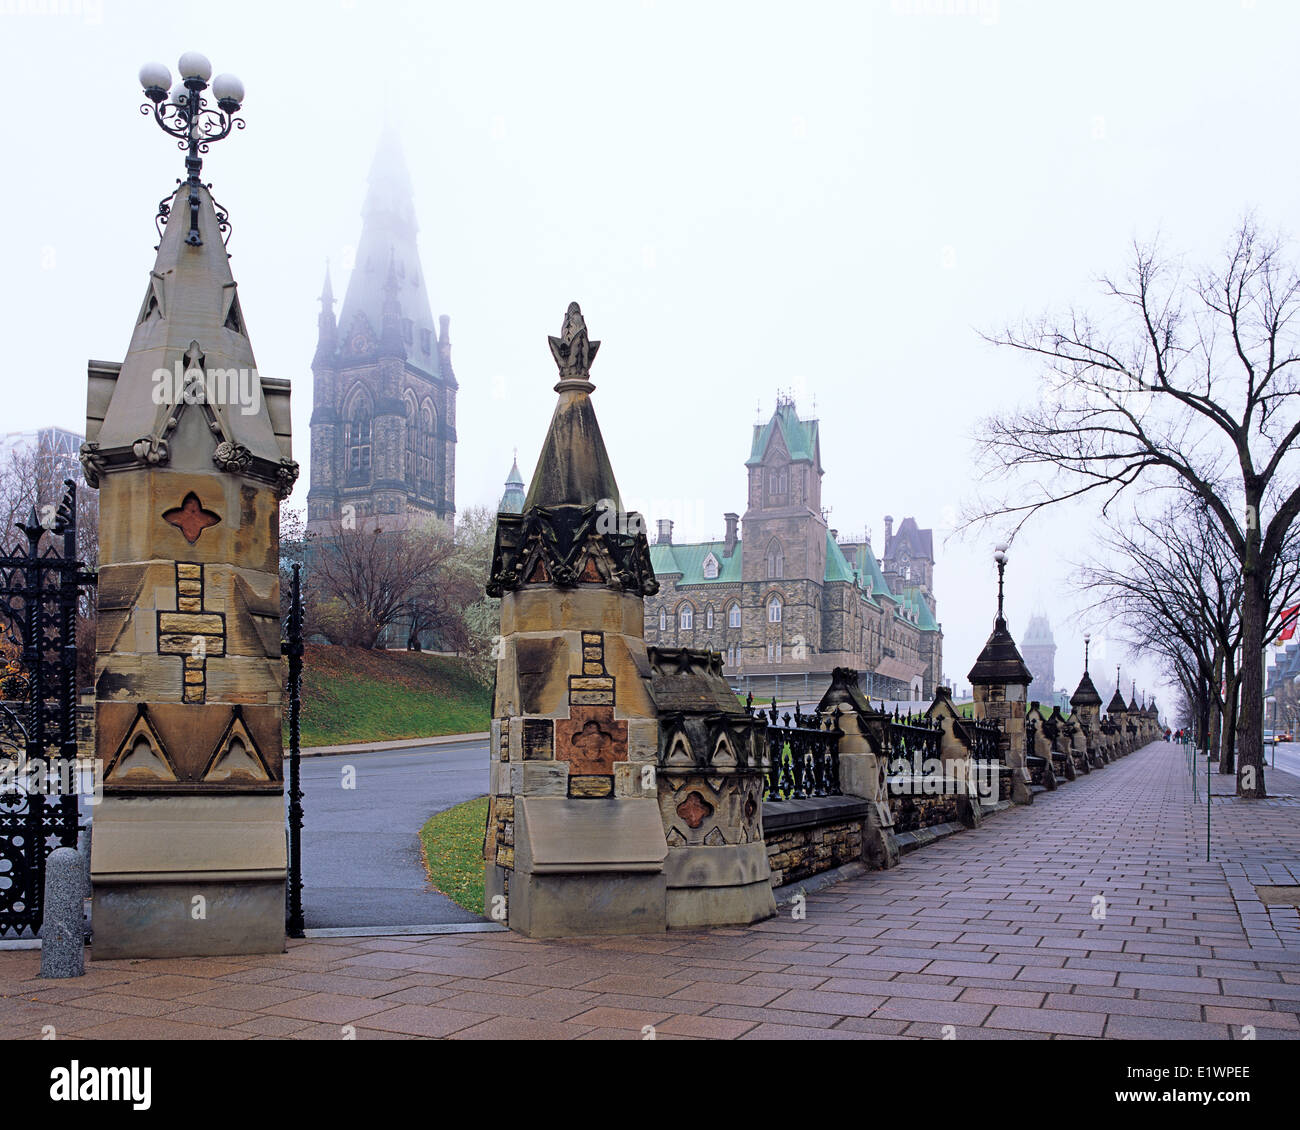 WEST BLOCK, WEST SIDE, AFTER THE RAIN, PARLIAMENT OF CANADA, OTTAWA, ONTARIO, CANADA Stock Photo